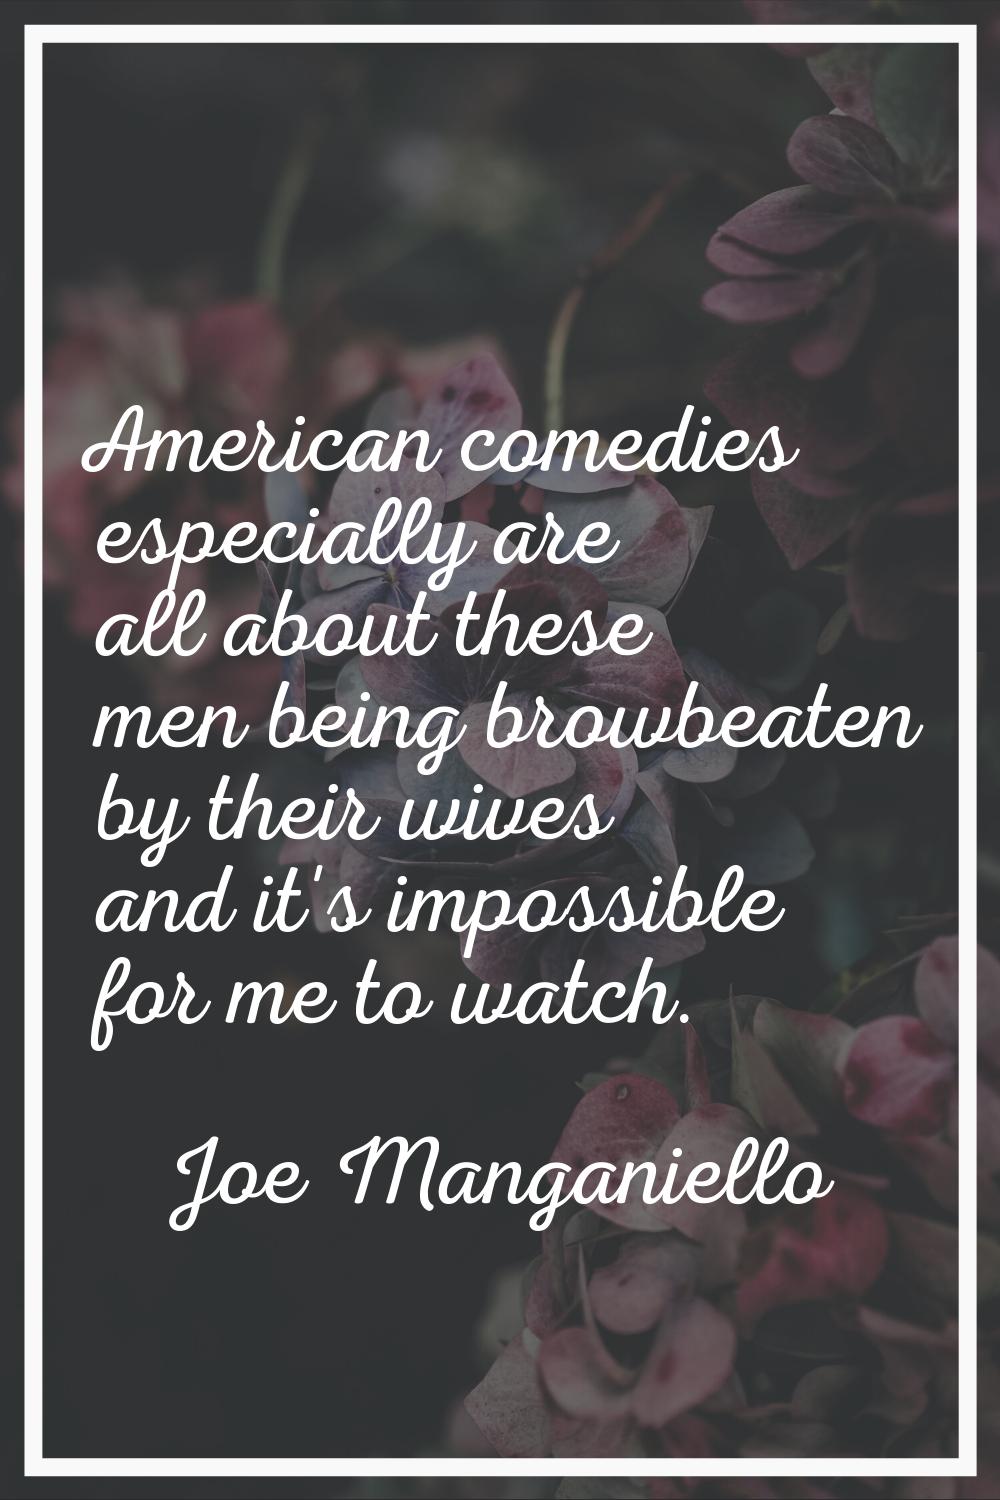 American comedies especially are all about these men being browbeaten by their wives and it's impos